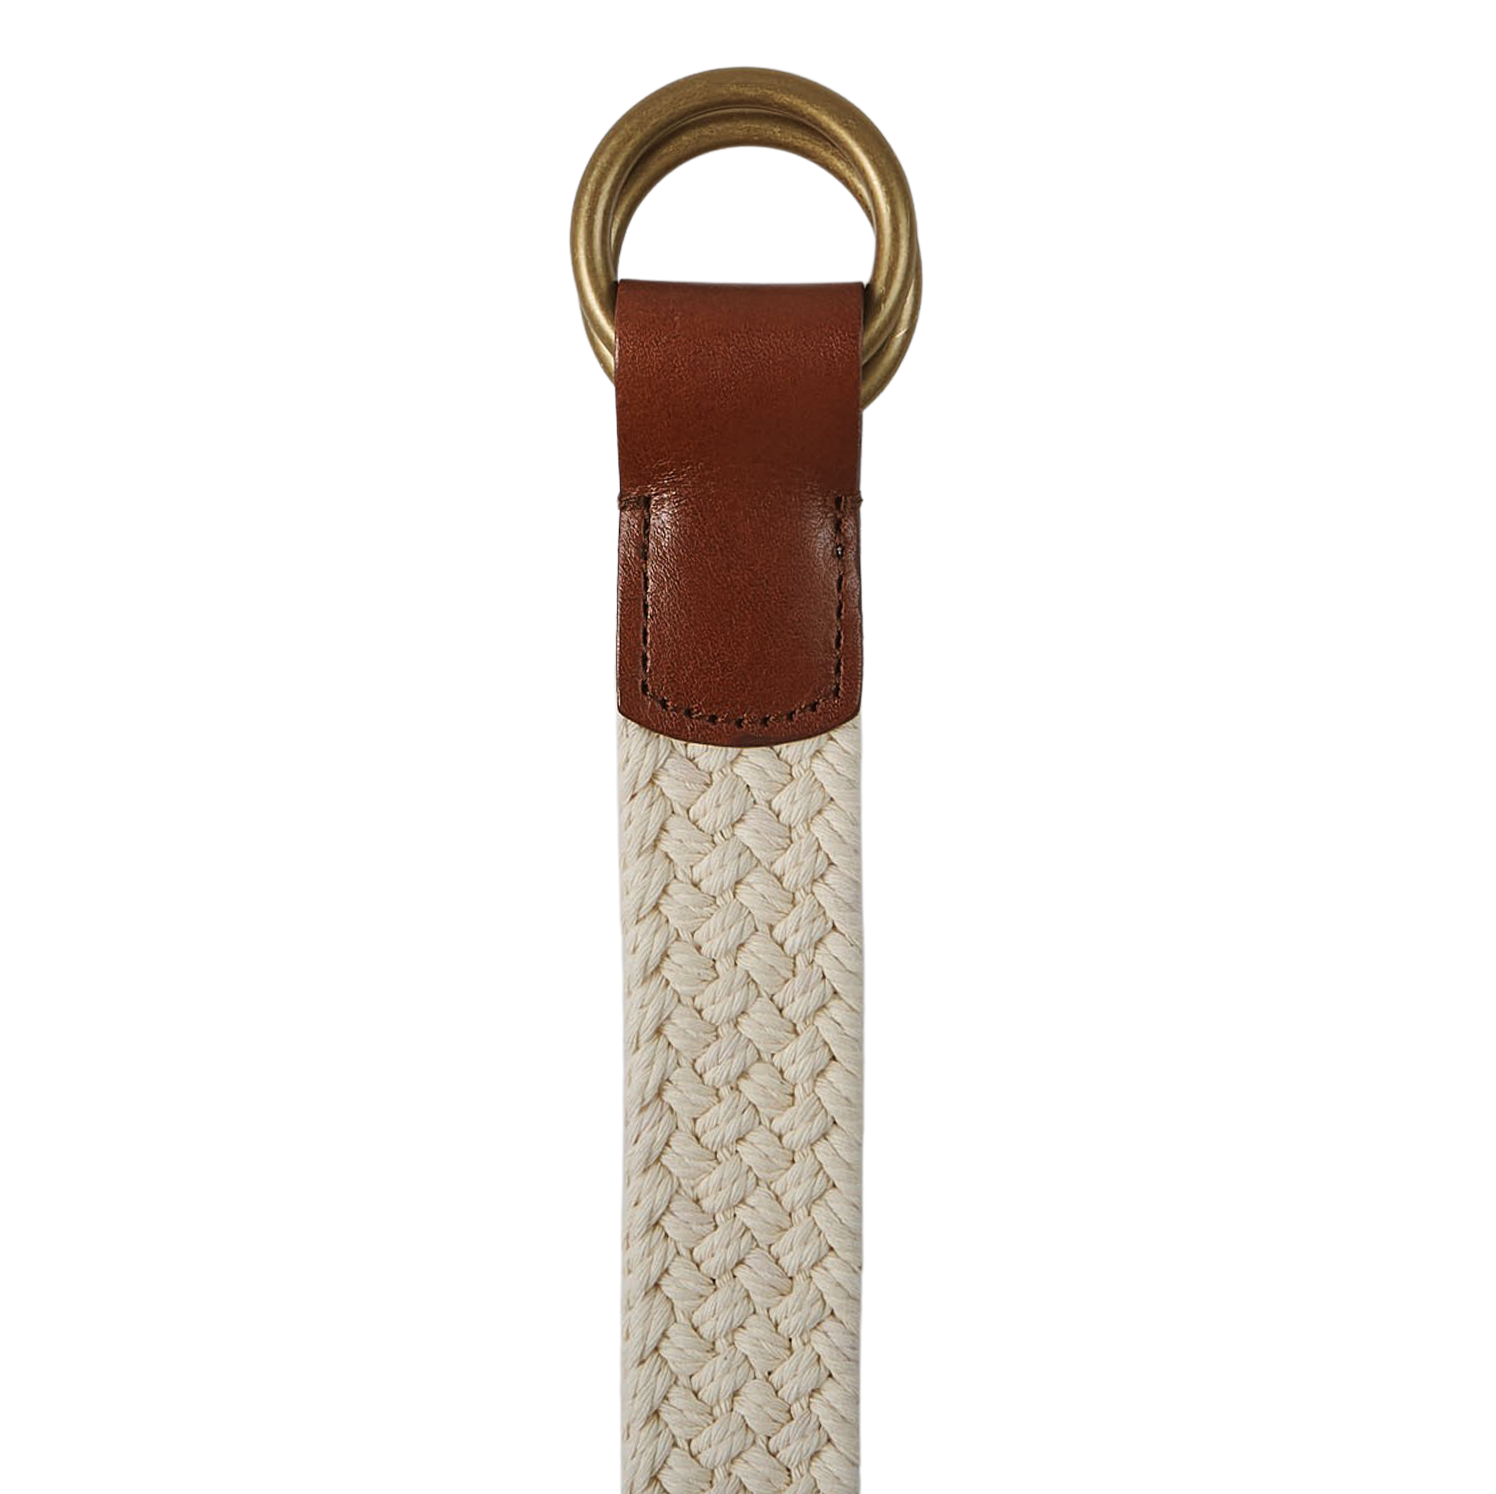 An Anderson's cream beige cotton canvas 30mm belt with a brass buckle, perfect for casual outfits.